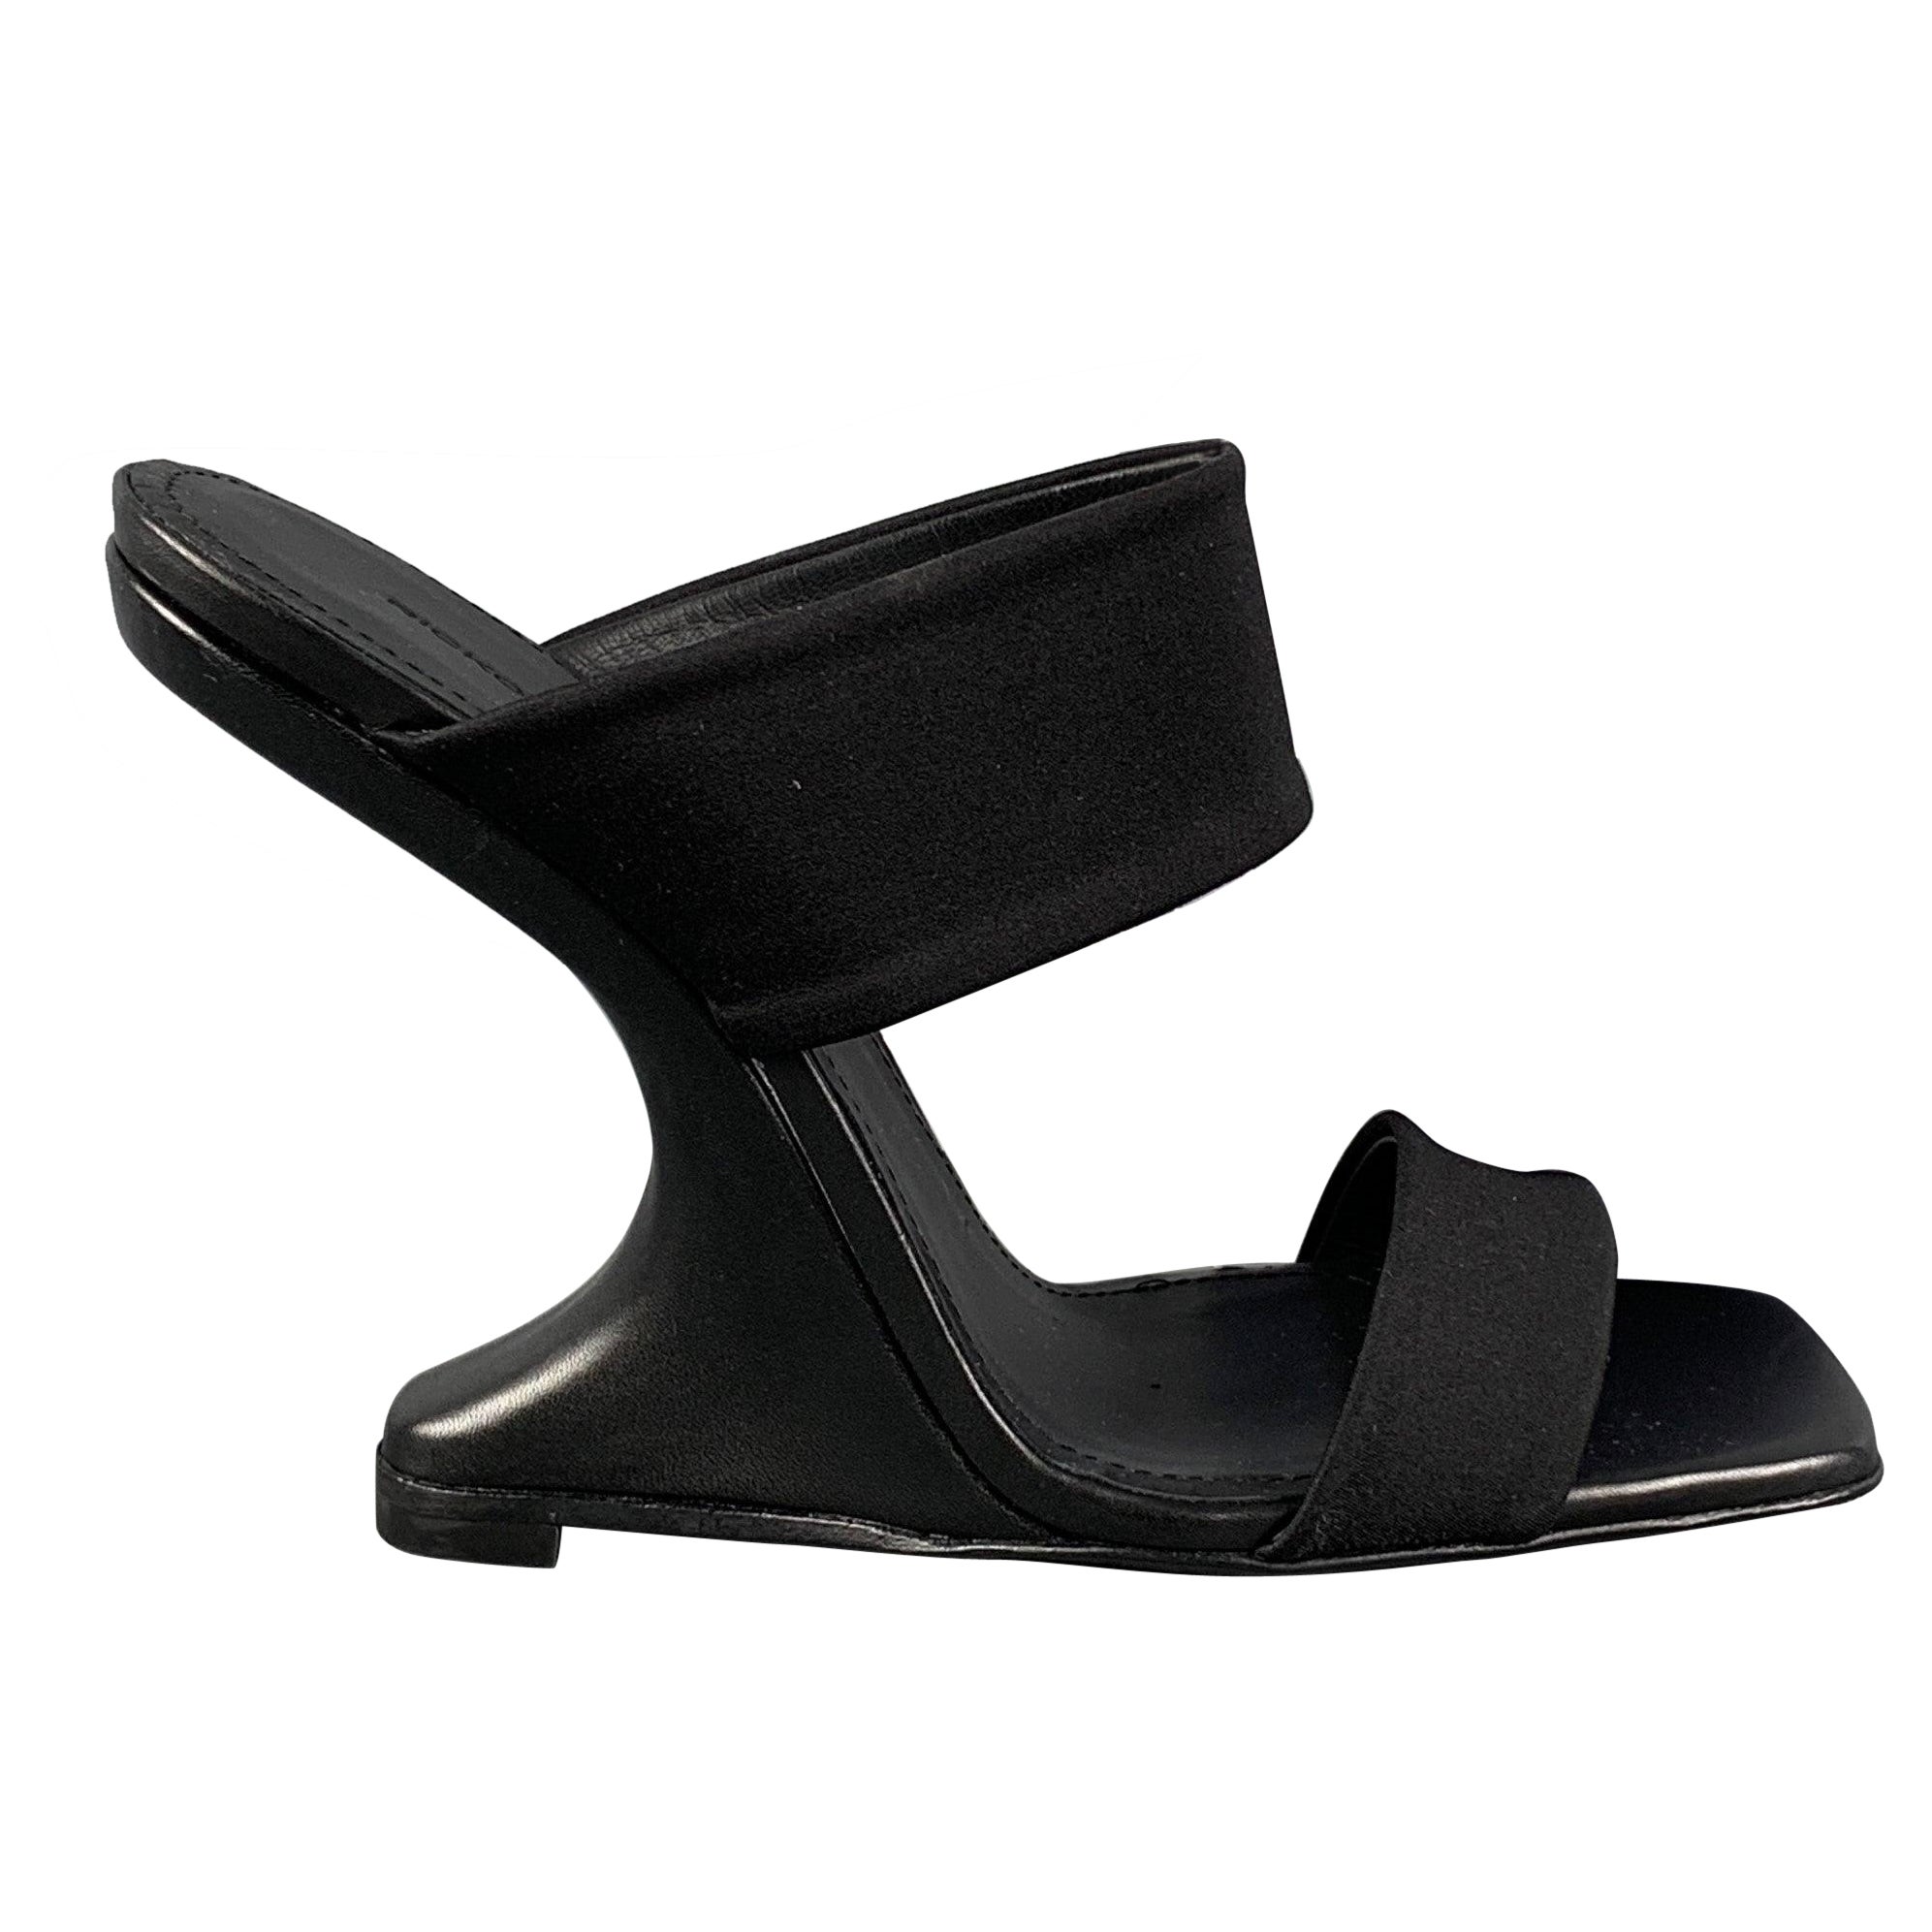 RICK OWENS Size 7 Black Nylon Curved Wedge Sandals For Sale